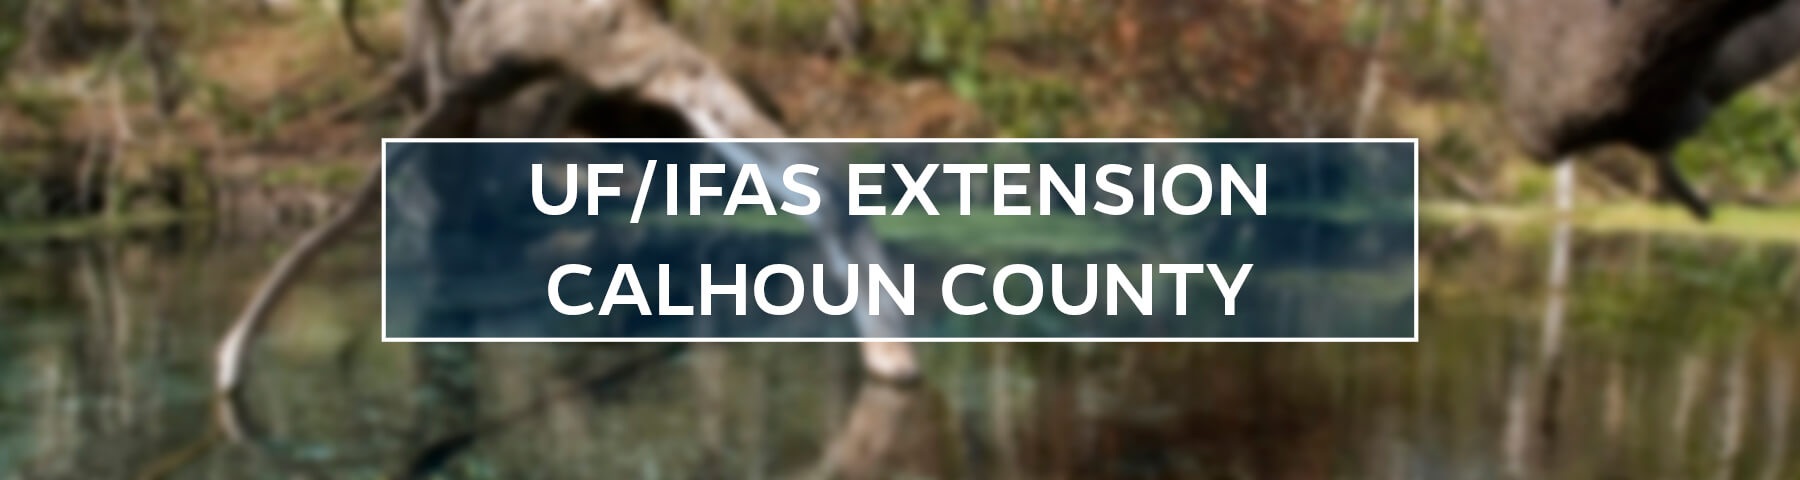 UF/IFAS Extension Calhoun County